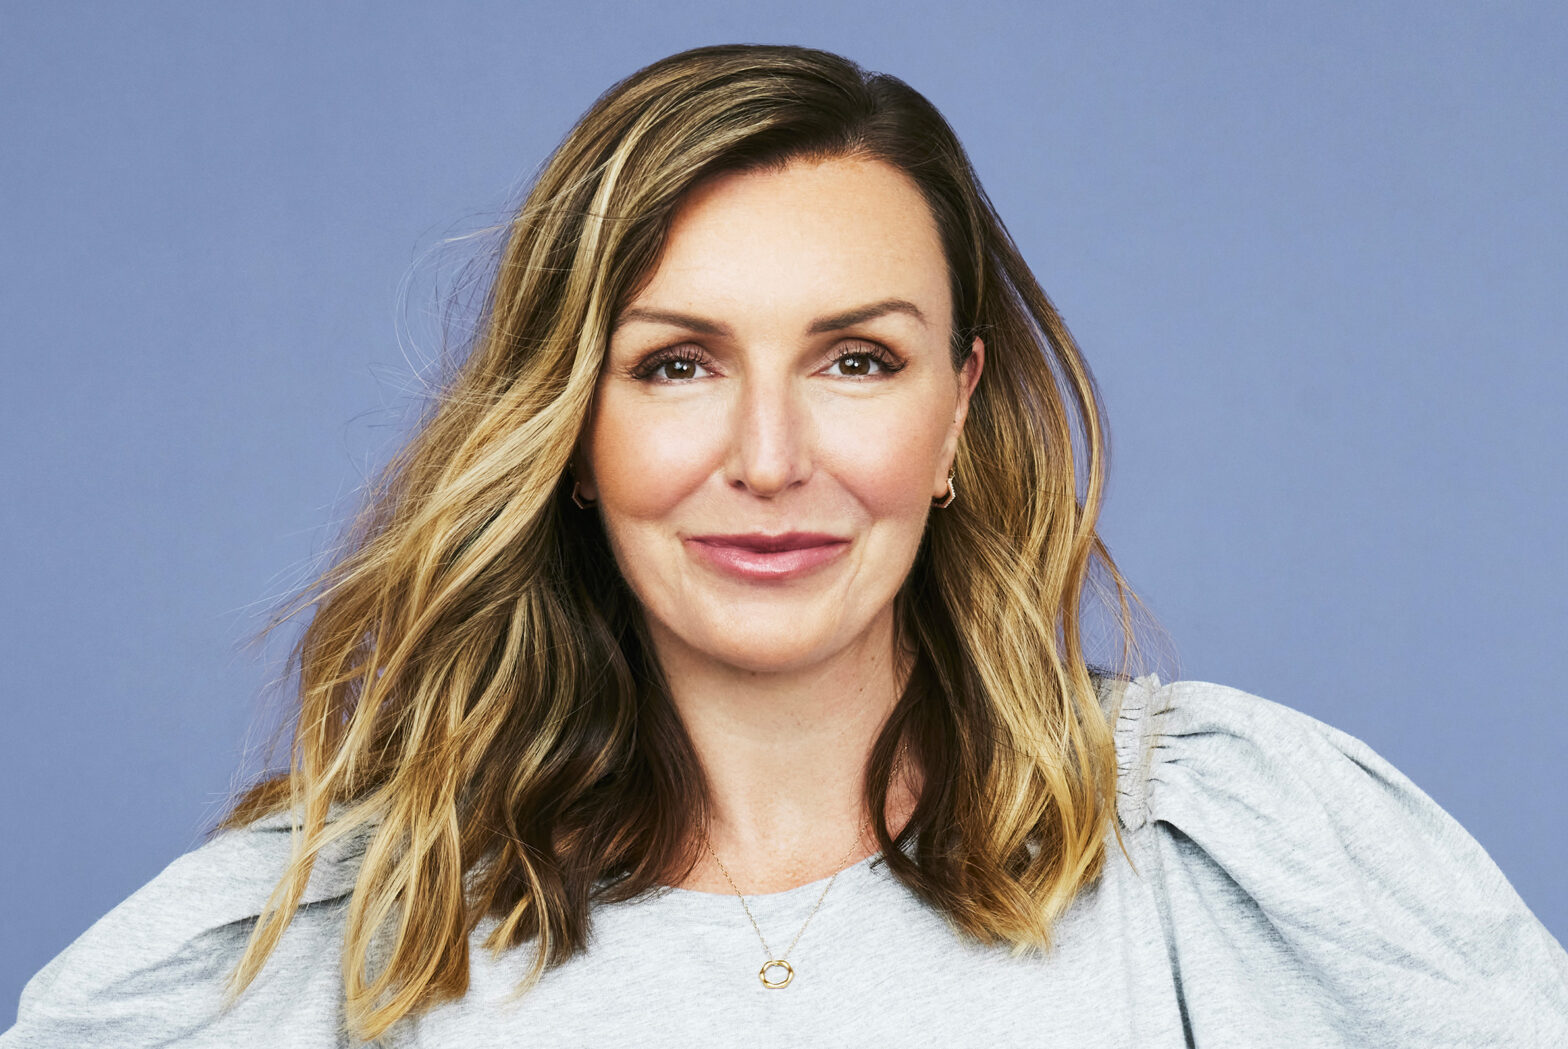 Women’s Health UK editor-in-chief: the future of publishing is membership